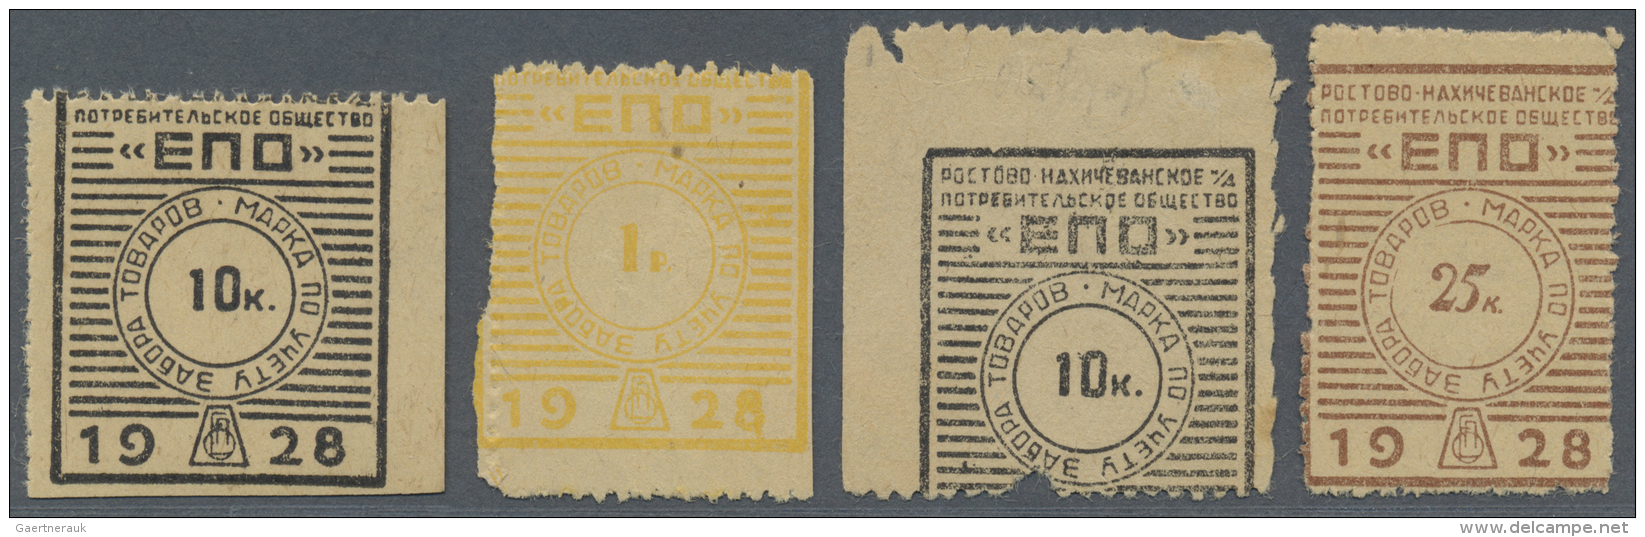 Russia / Russland: Rostov On Don Consumer Society EPO Workers Credit Stamps 2 X 10, 25 Kopeks And 1 Ruble 1928, P.NL In - Russie